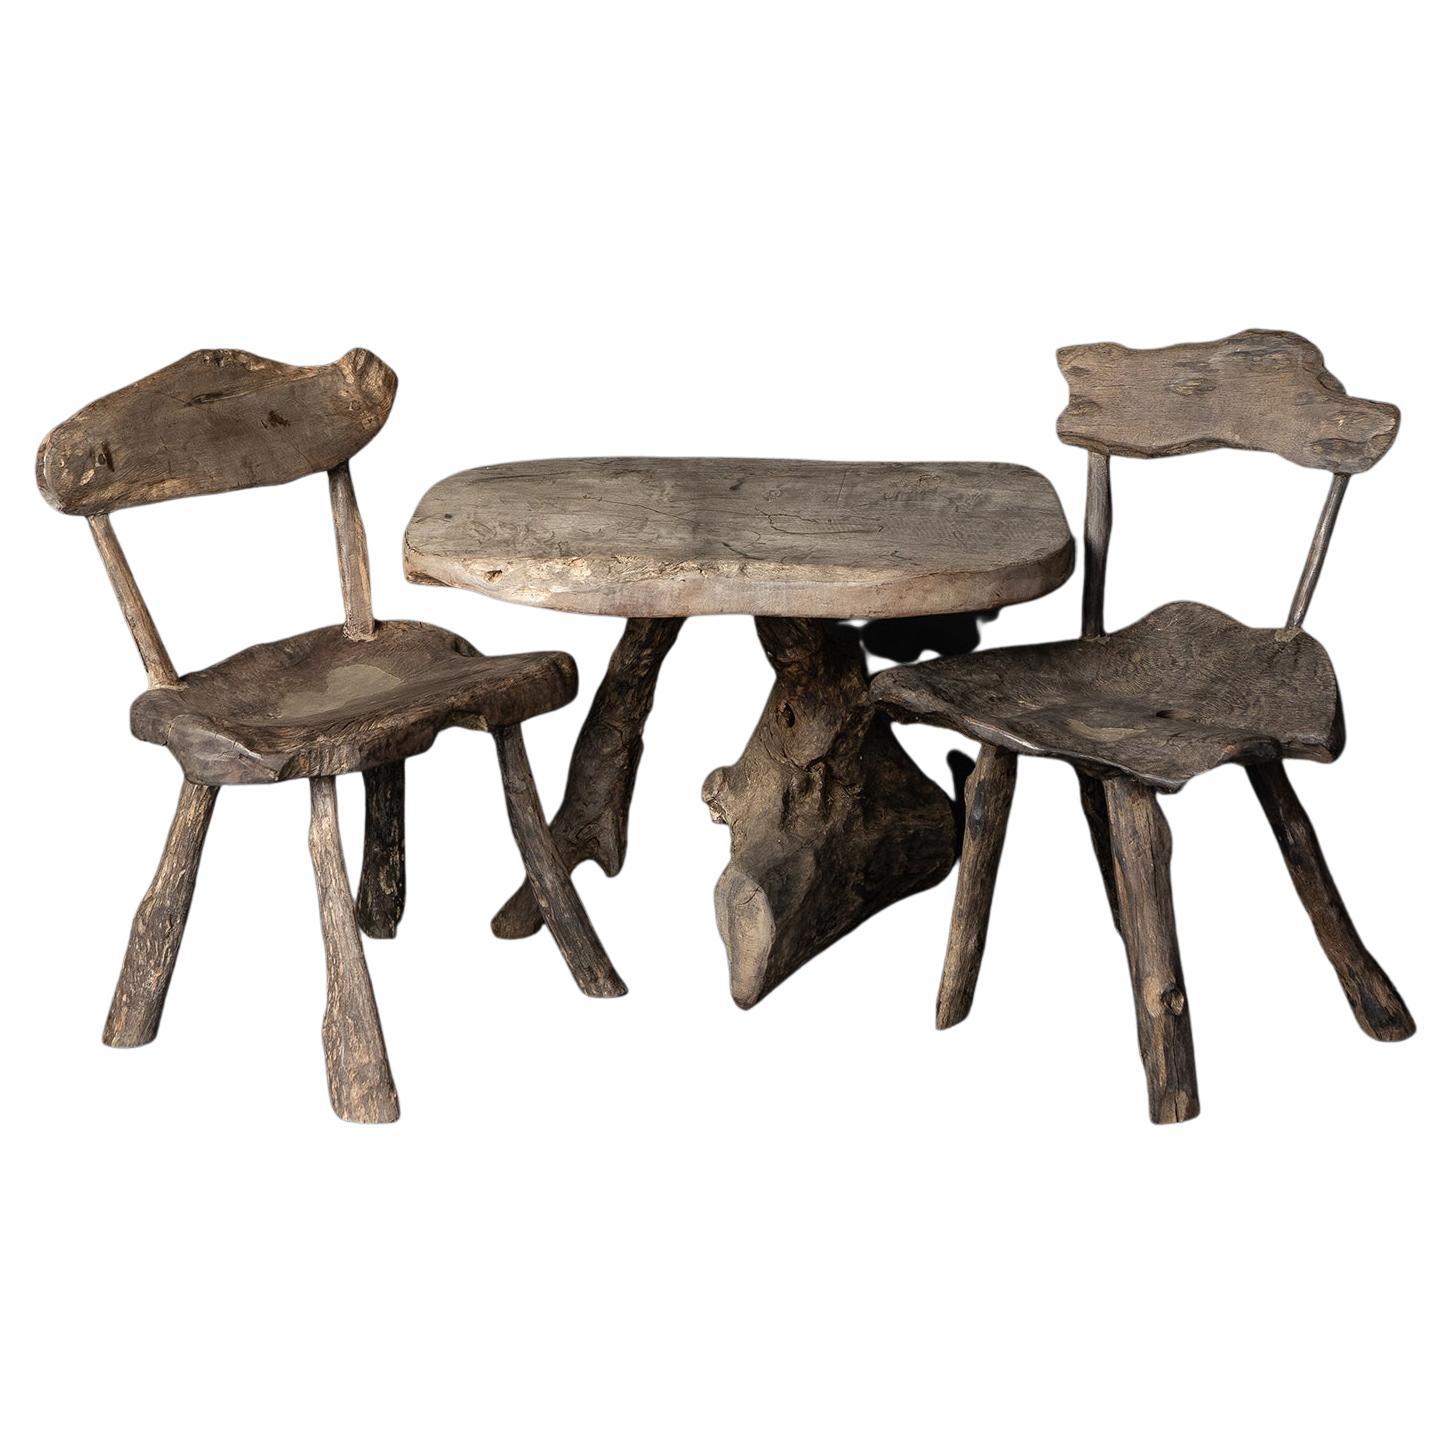 Vintage Primitive Naturalistic Ironwood Table And Chair Set, Rustic Garden